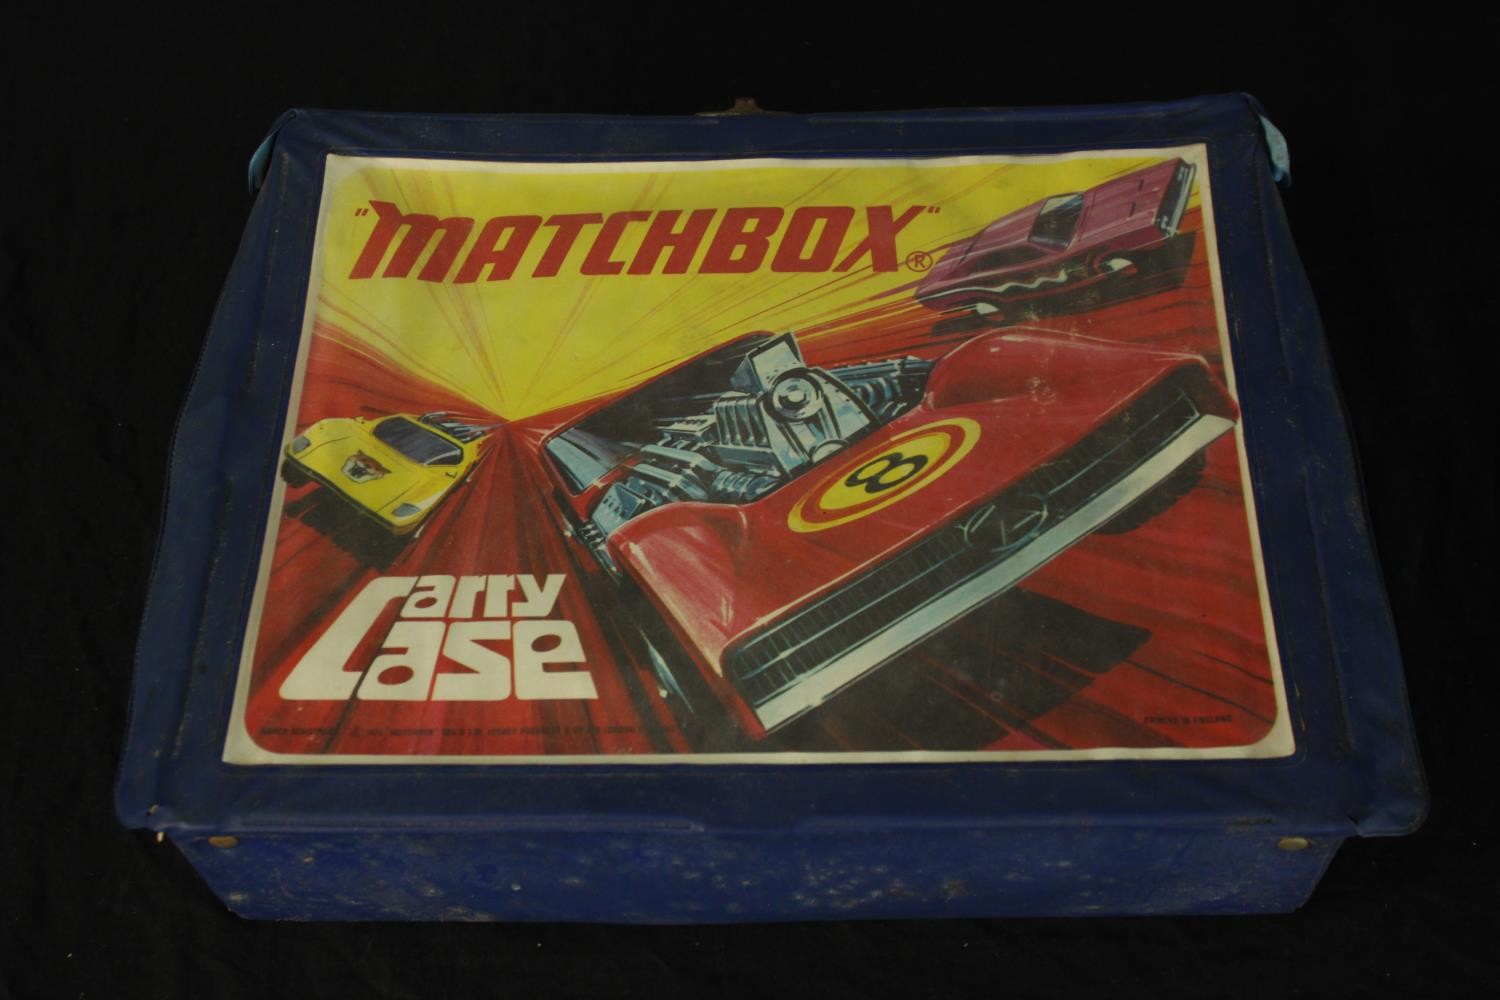 Matchbox Carry Case. With twenty-four cars in used condition. A mix of industrial vehicles and